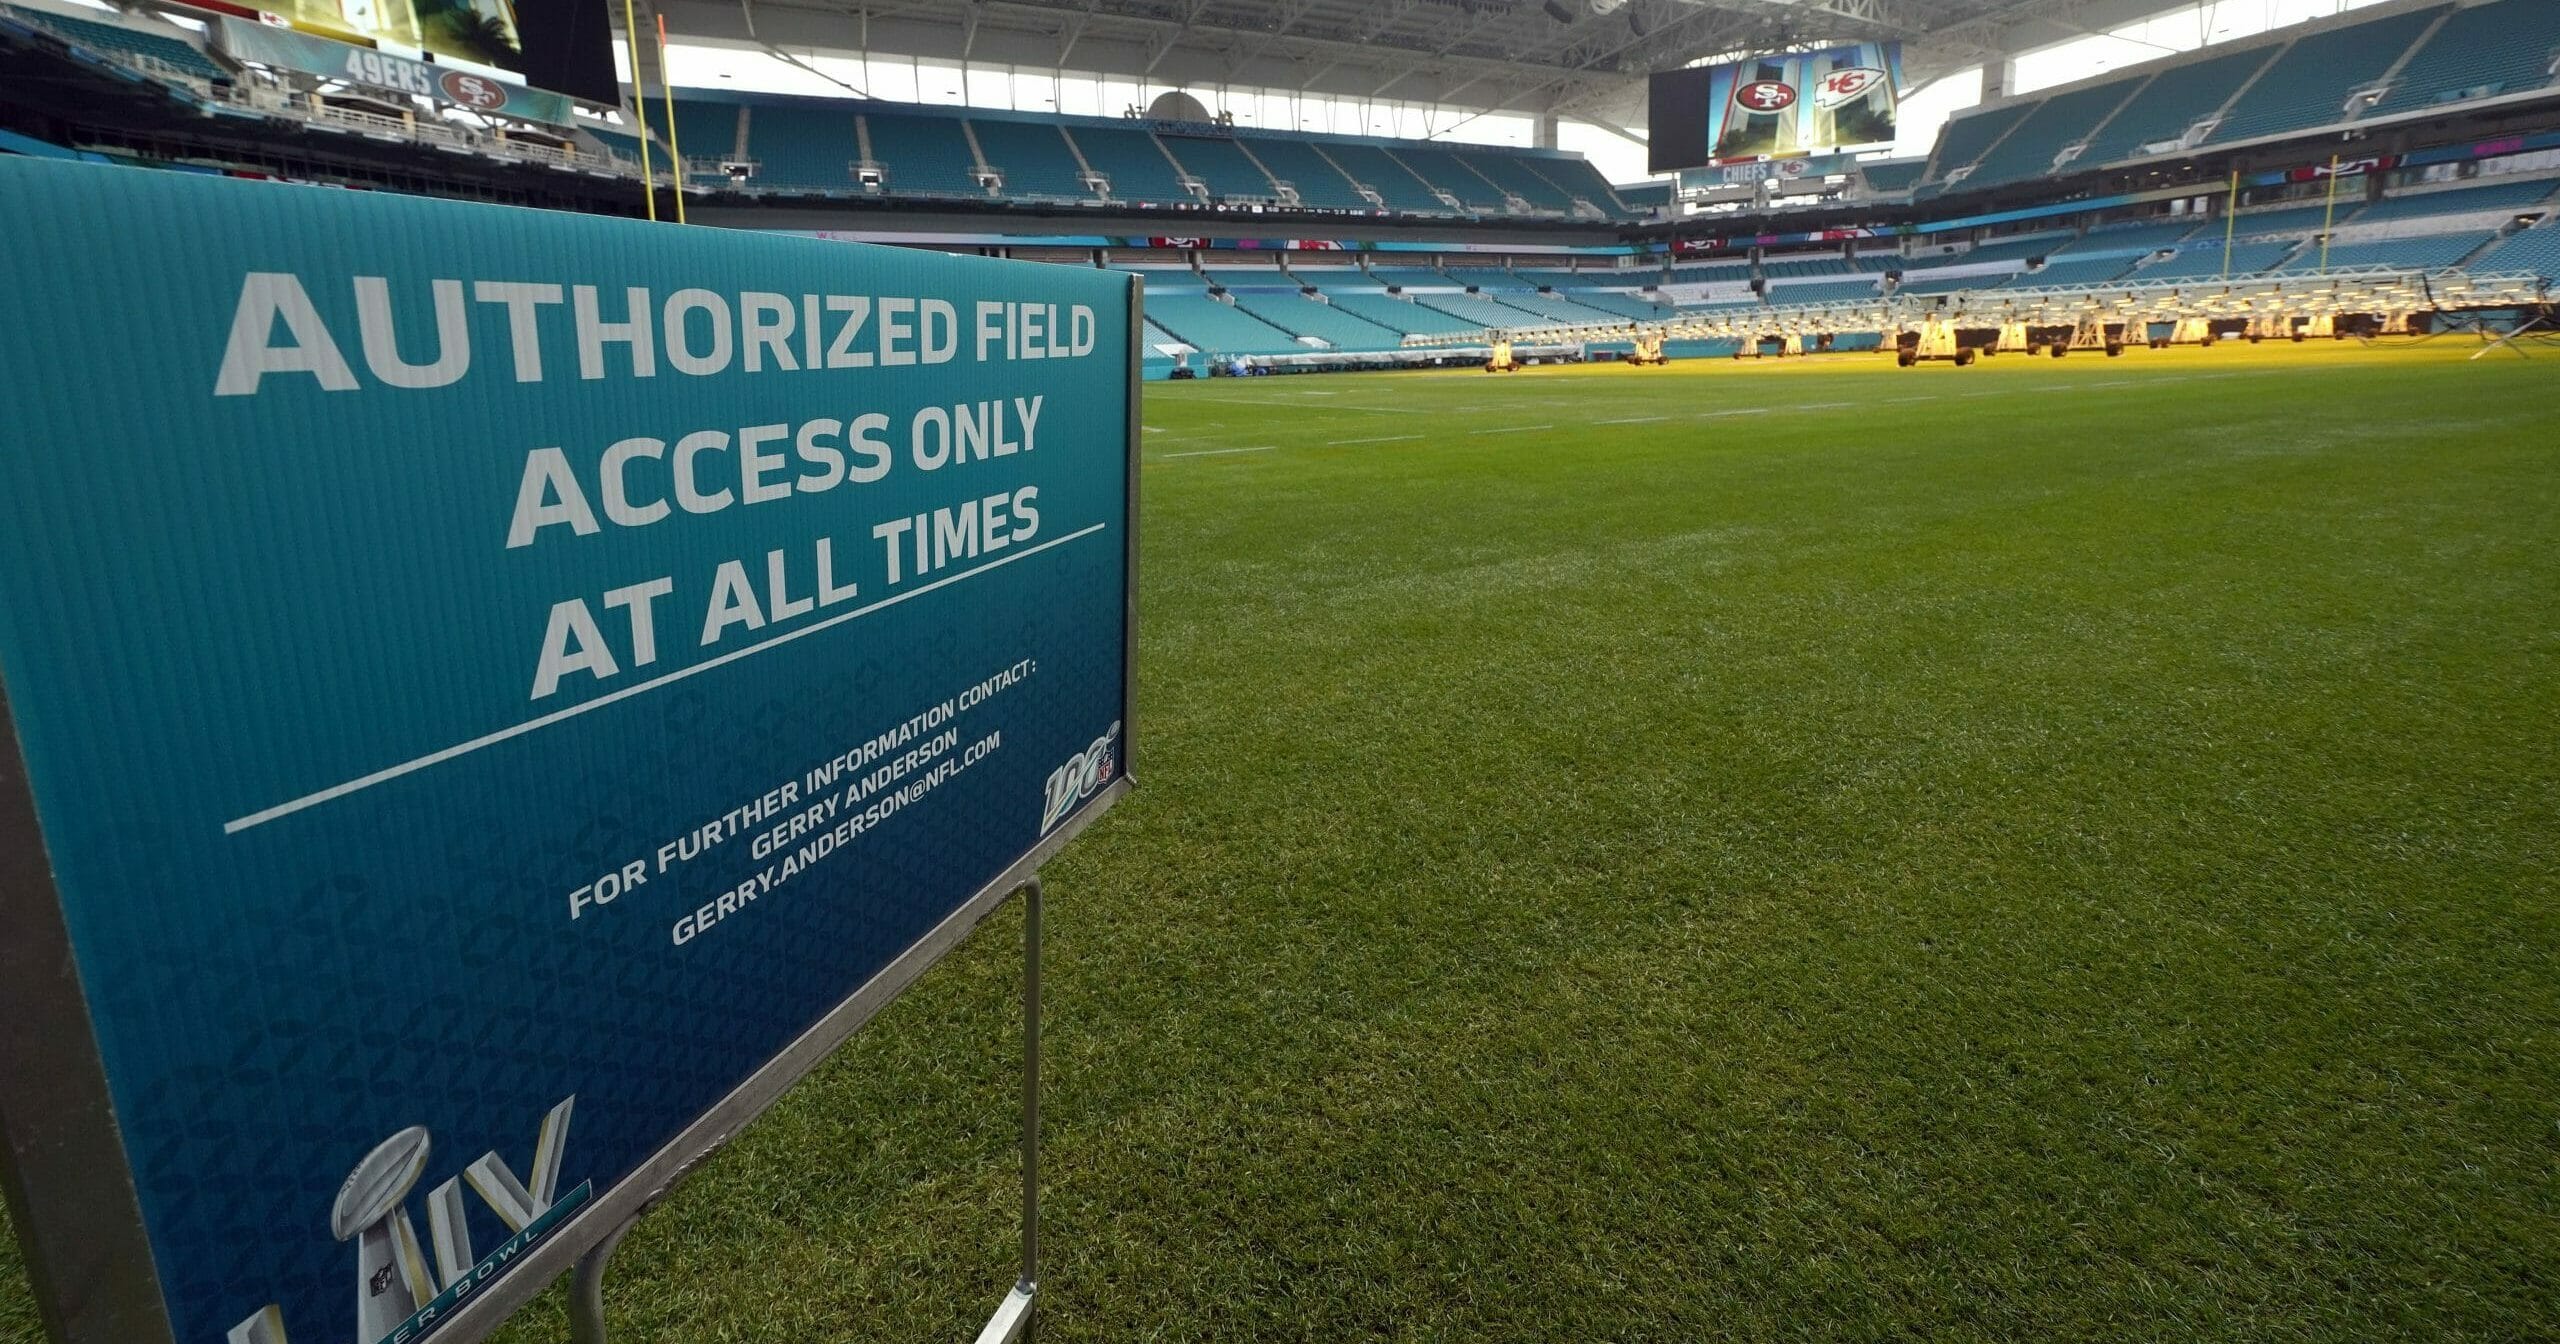 Hard Rock Stadium is shown during a tour for the media on Jan. 28, 2020, in Miami Gardens, Florida, in preparation for the NFL Super Bowl LIV football game.